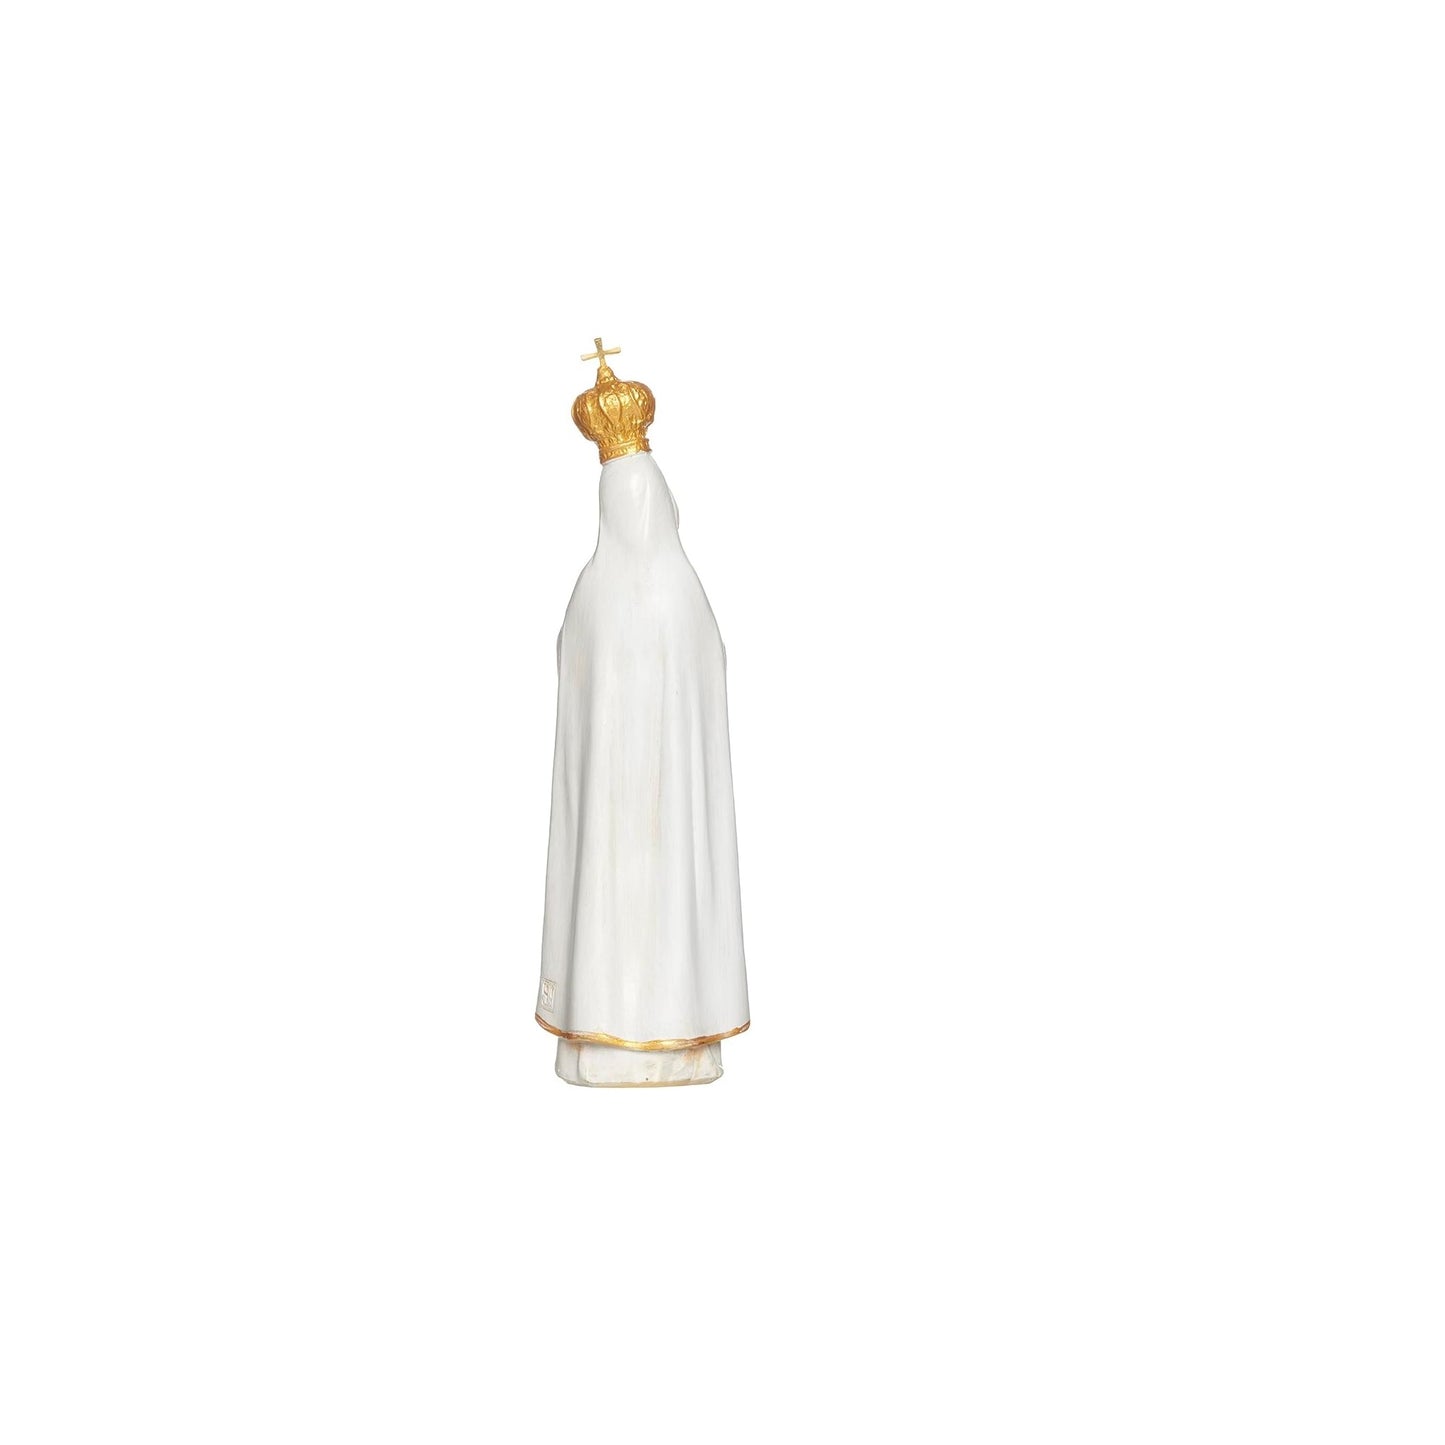 Our Lady of Fatima Statue 7" by Roman